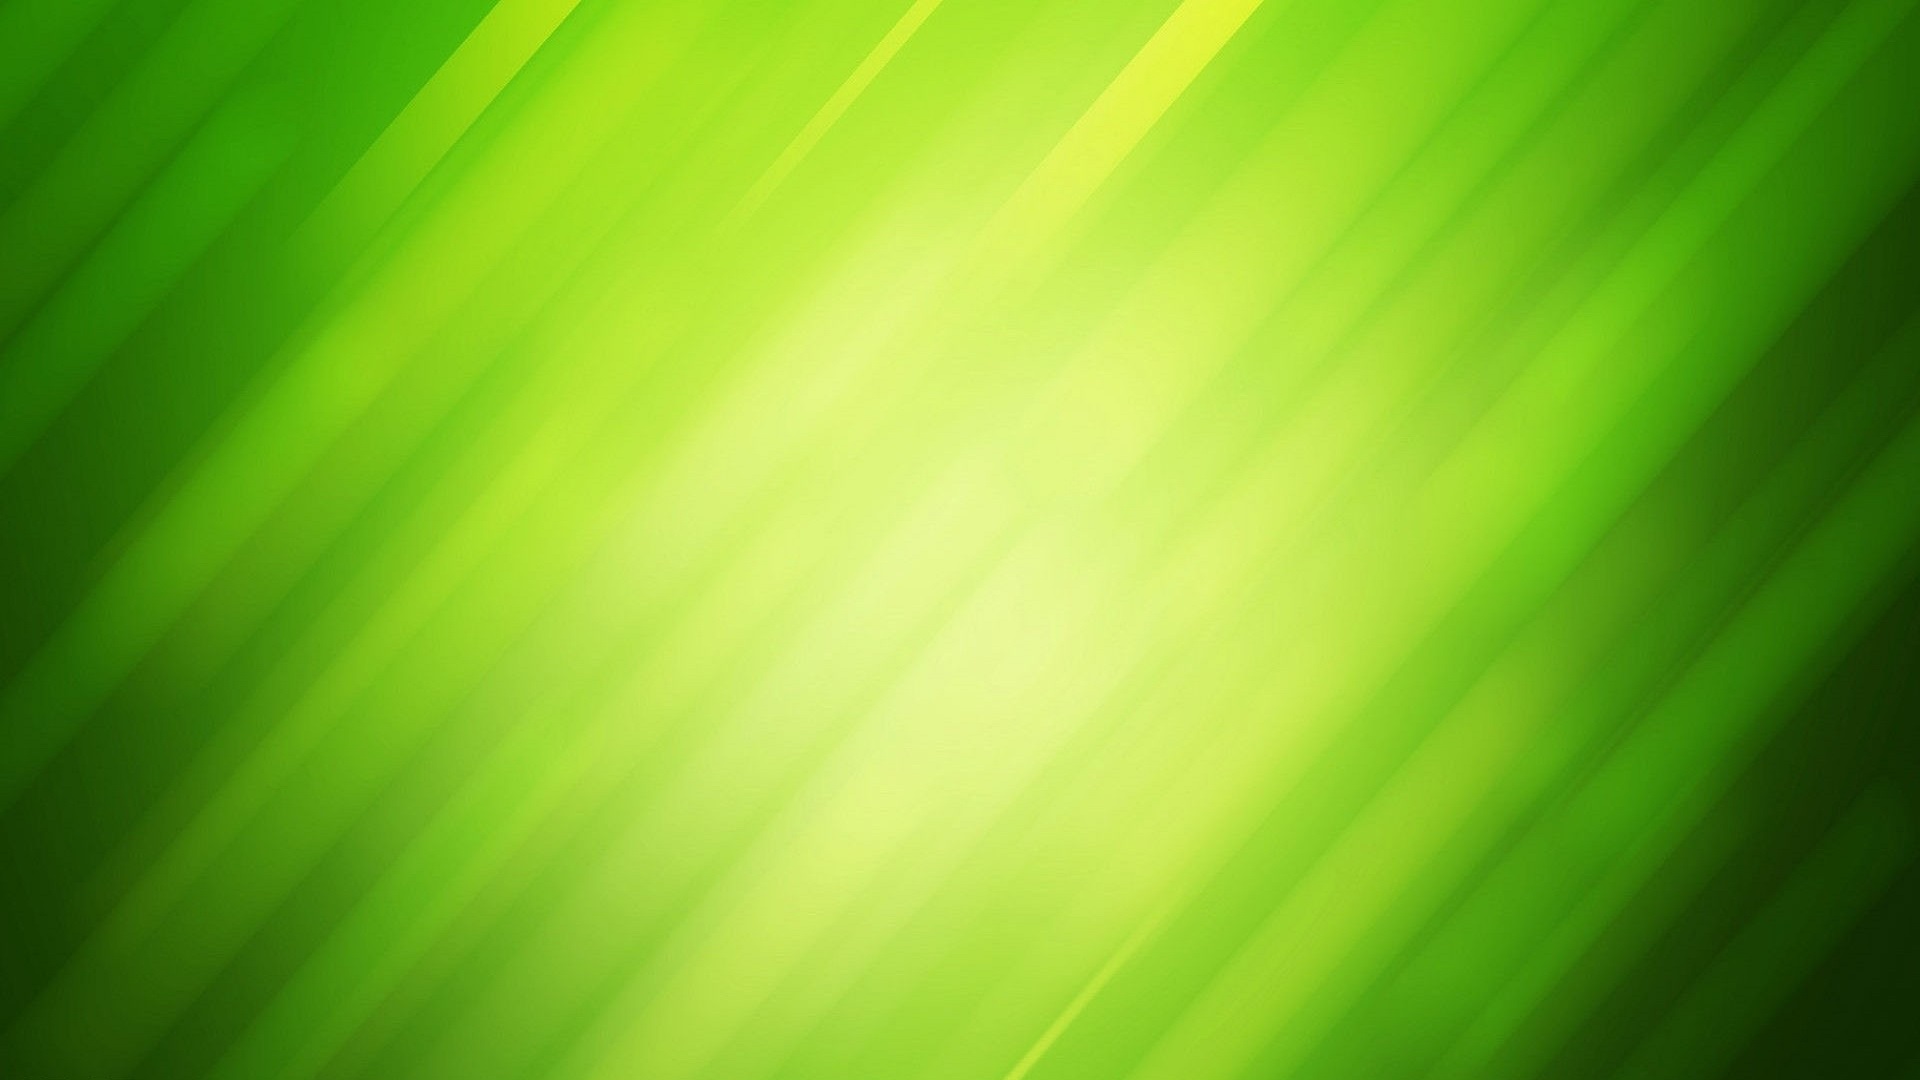 Green And Yellow Background Hd - HD Wallpaper 